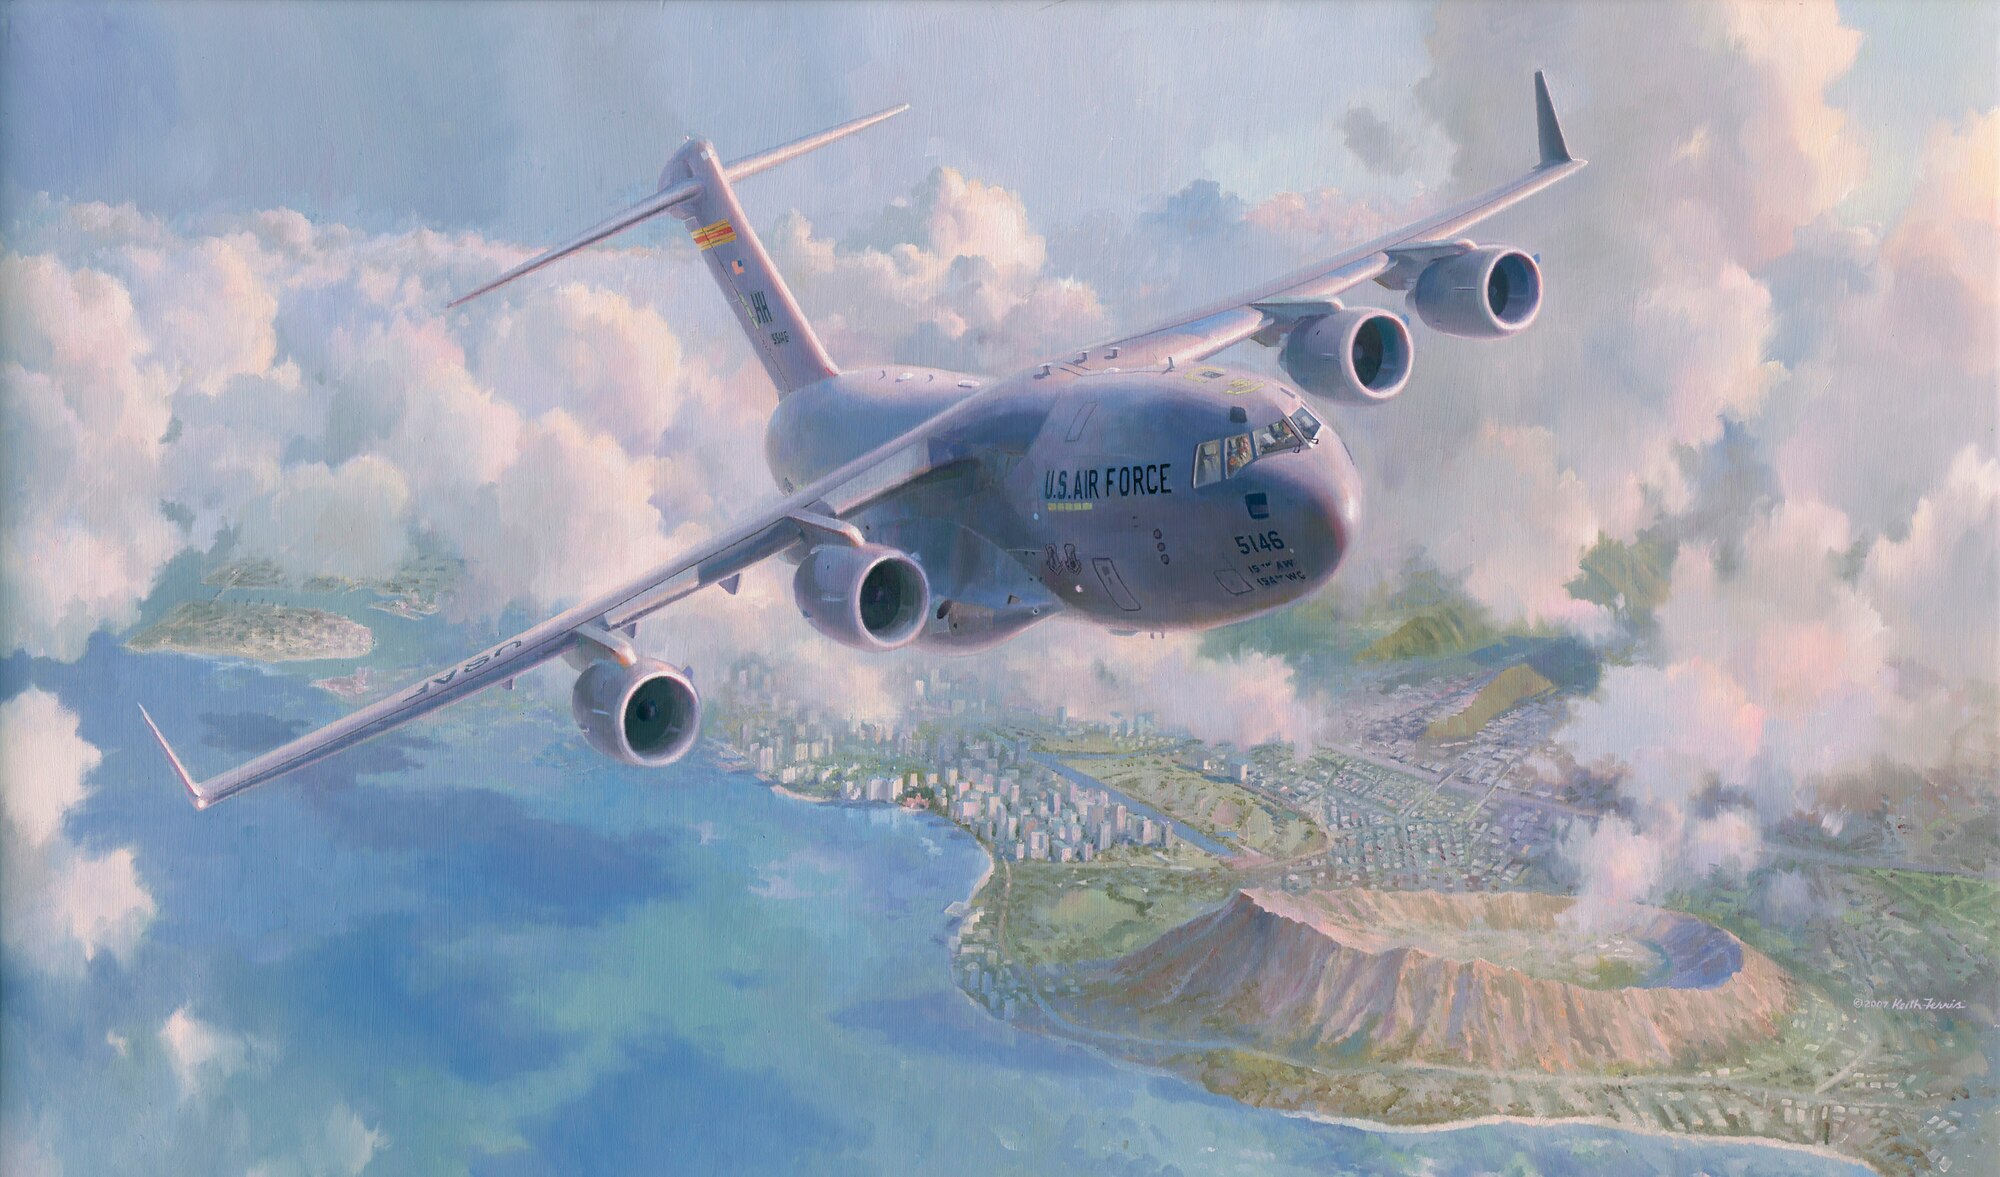 "Waikiki Sunrise," a painting by aviation artist Keith Ferris, is one of more than 200 paintings being introduced into the Air Force Art Program. The new artwork will be displayed Oct. 21 through 24 at the Officers' Club at Bolling Air Force Base, D.C. There are more than 9,400 paintings in the Air Force Art Program collection. (U.S. Air Force illustration) 
